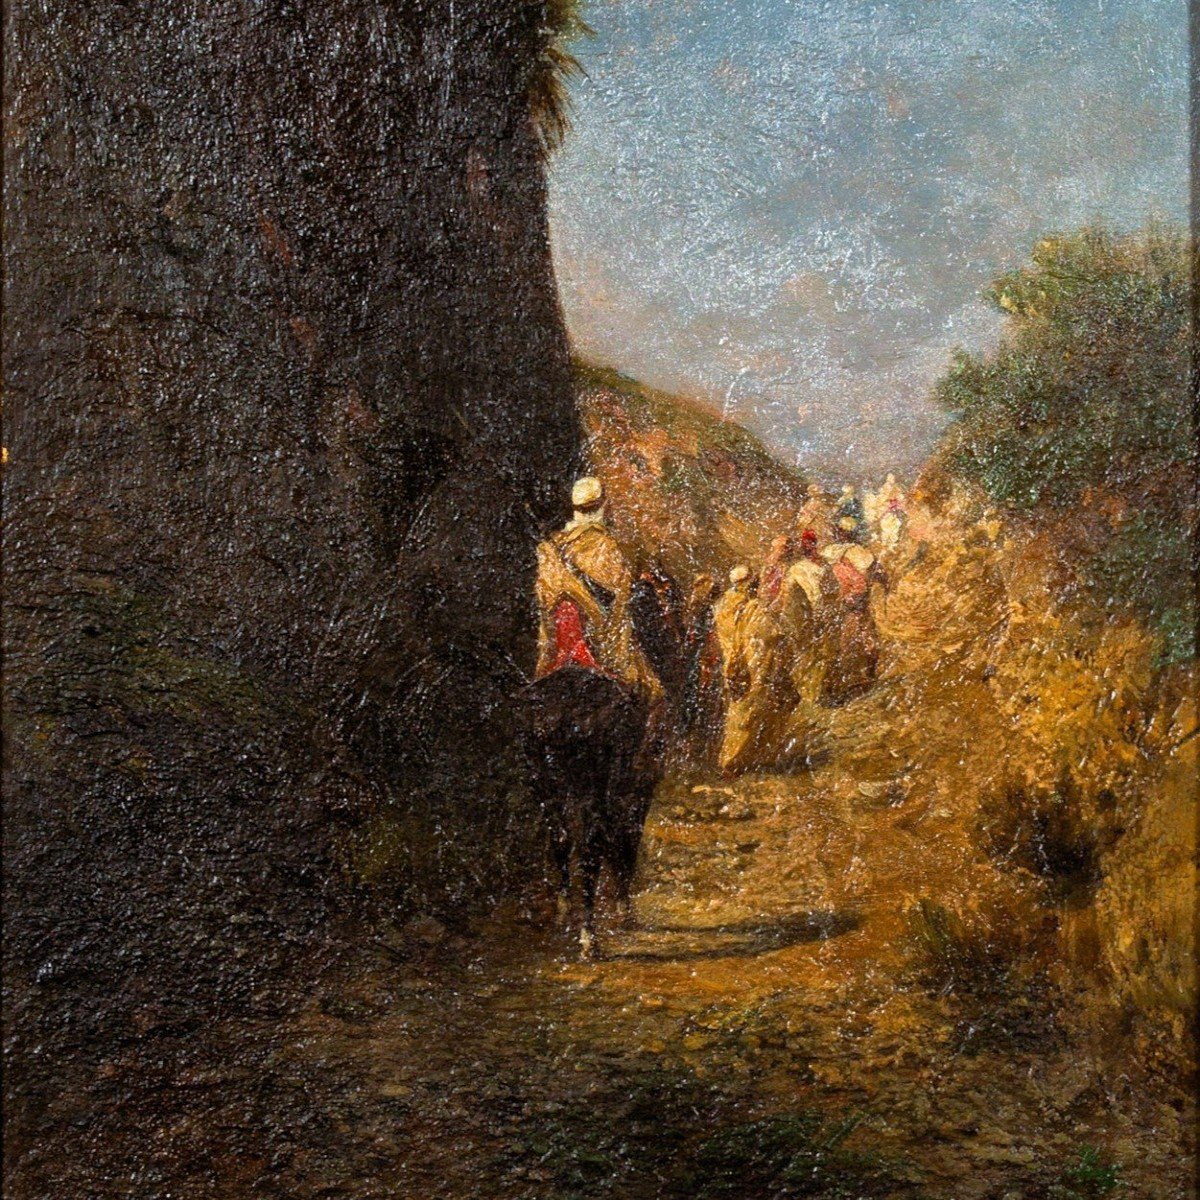 Horsemen And Bedouins Walking On A Path Near A Cliff, By Honoré Boze